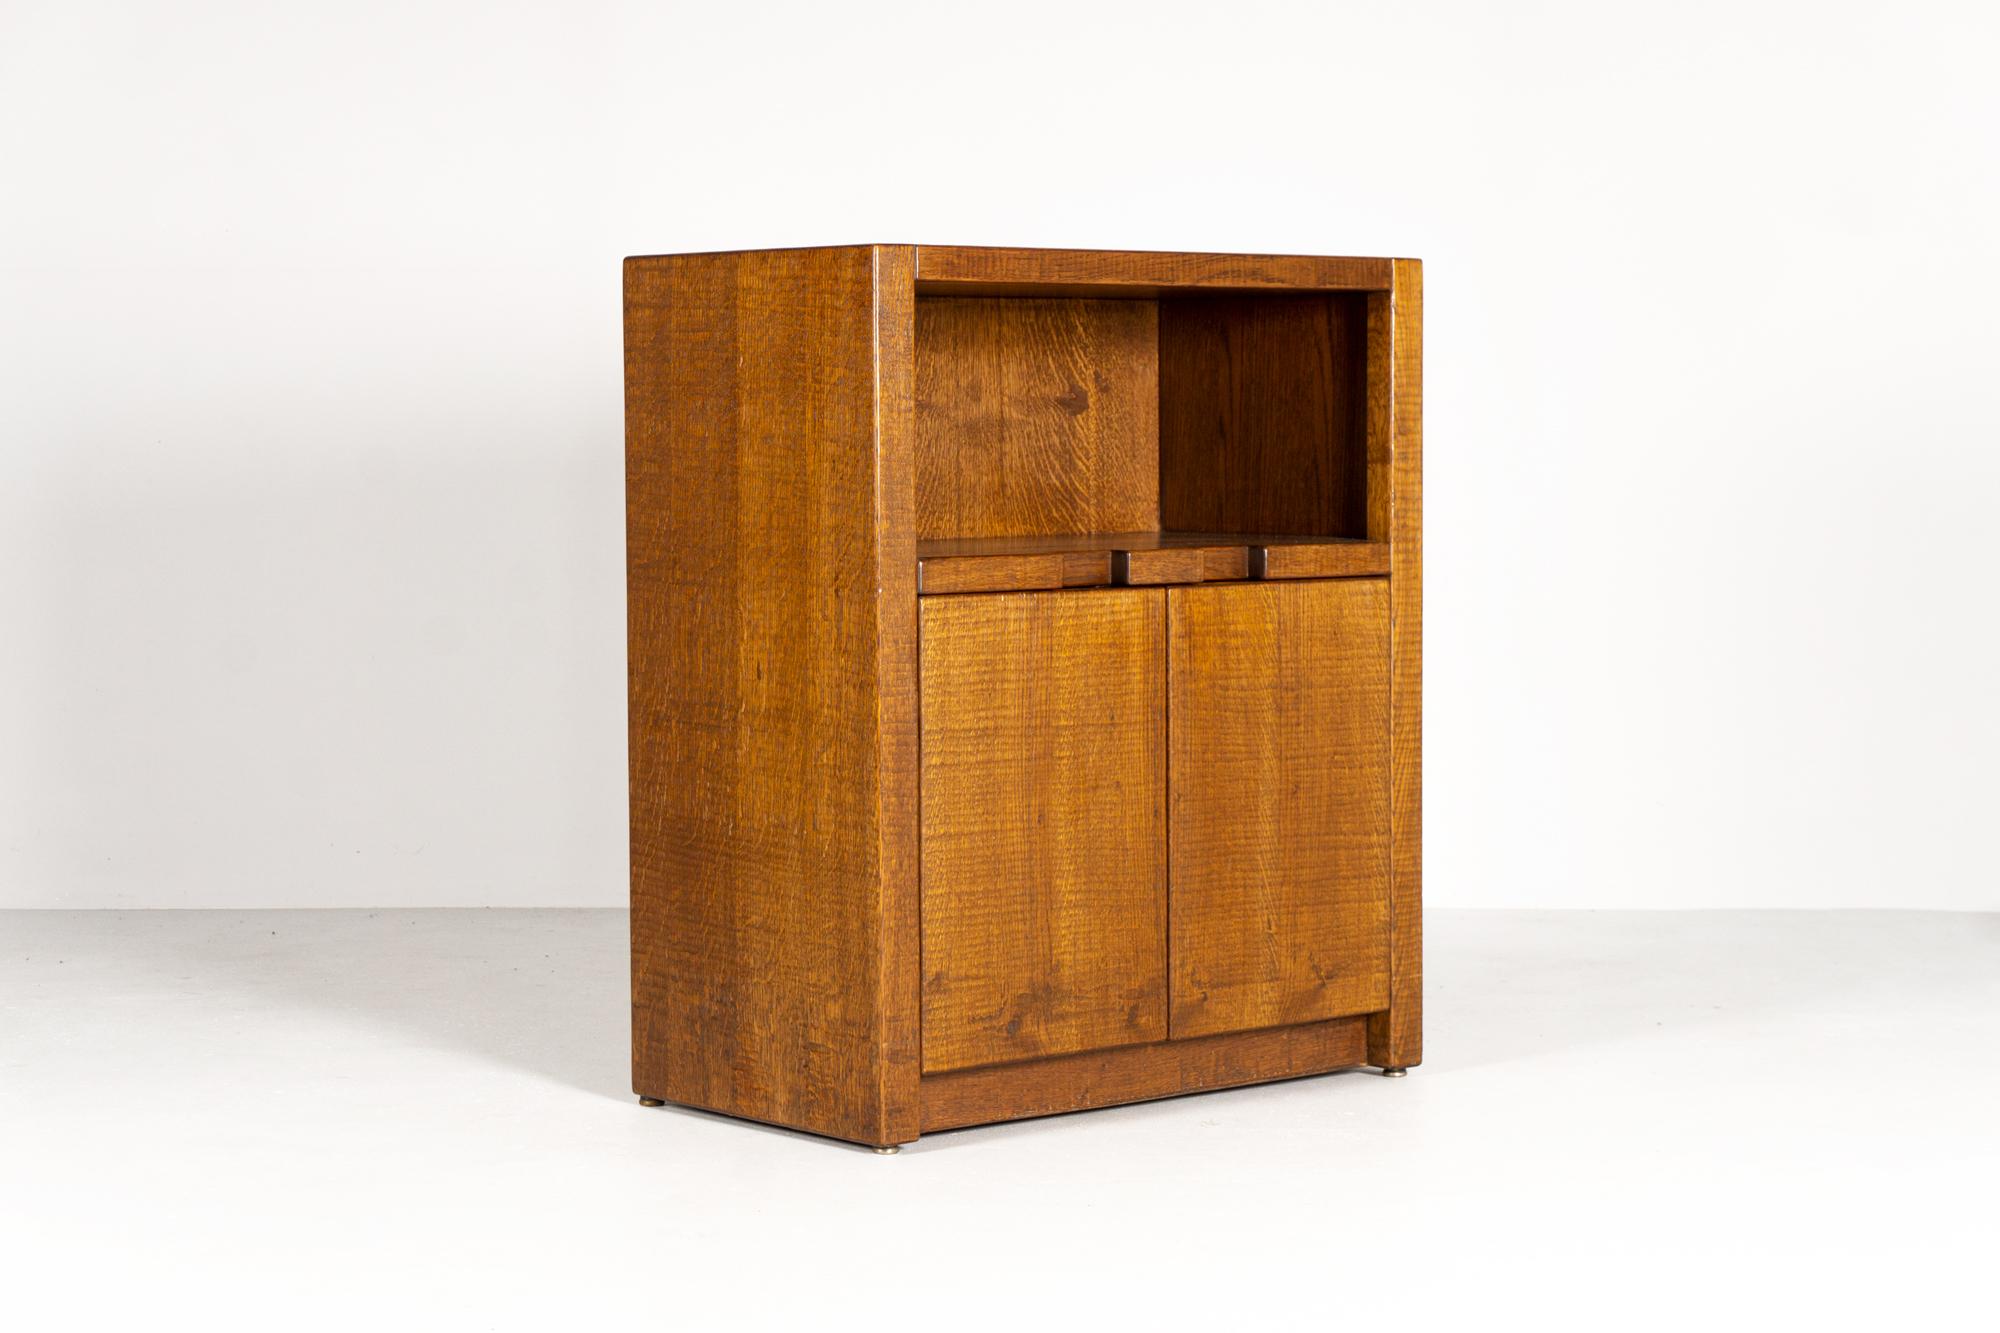 Sideboard by Giuseppe Rivadossi, solid oak, surface hand-chiseled